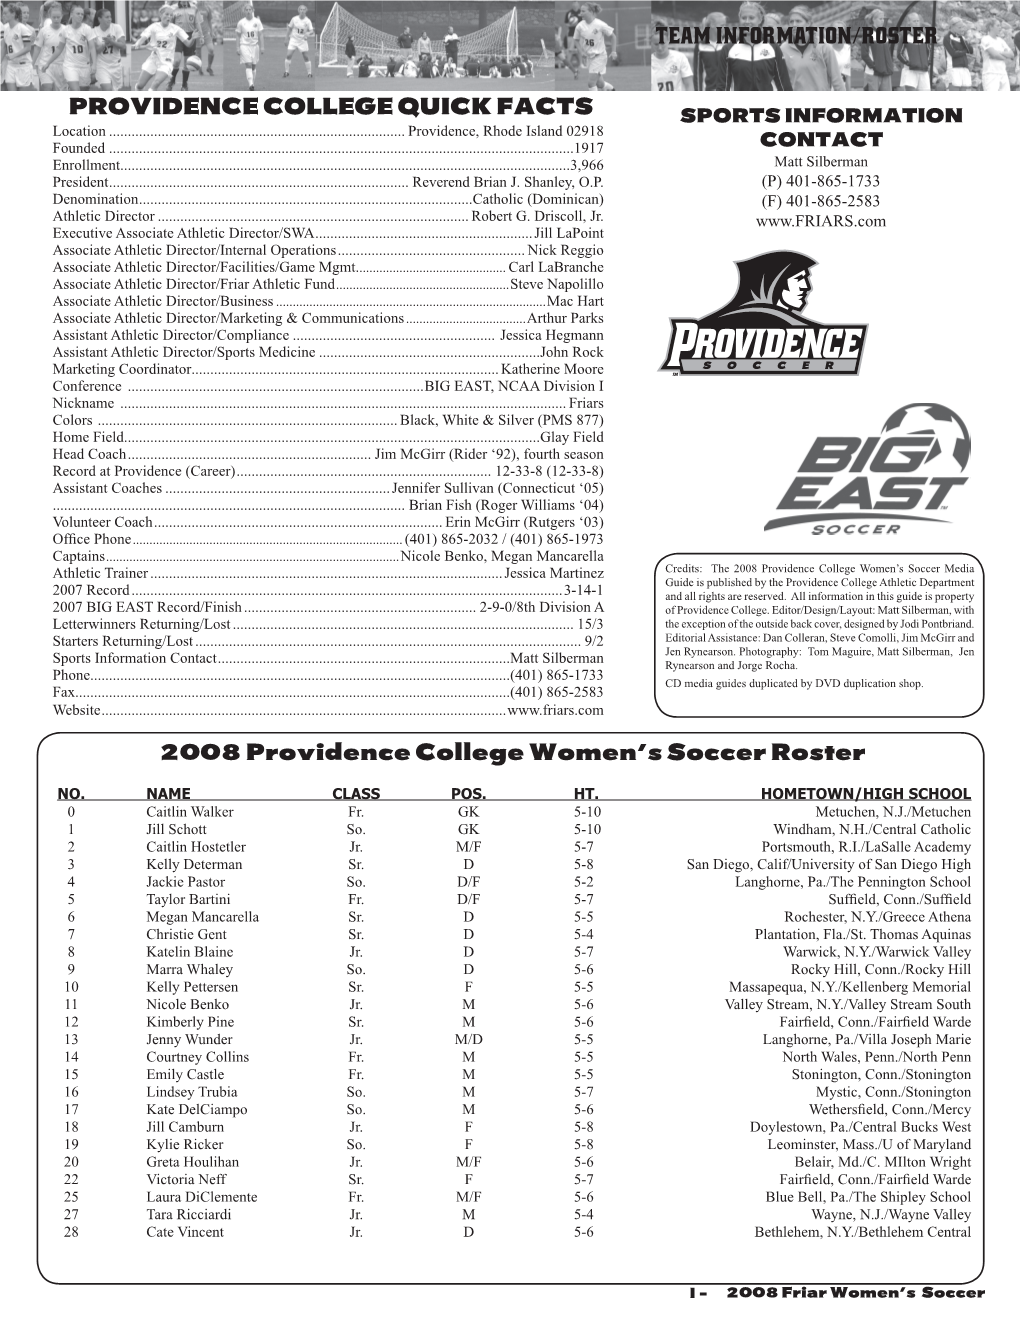 Providence College QUICK Facts TEAM INFORMATION/ROSTER 2008 Providence College Women's Soccer Roster